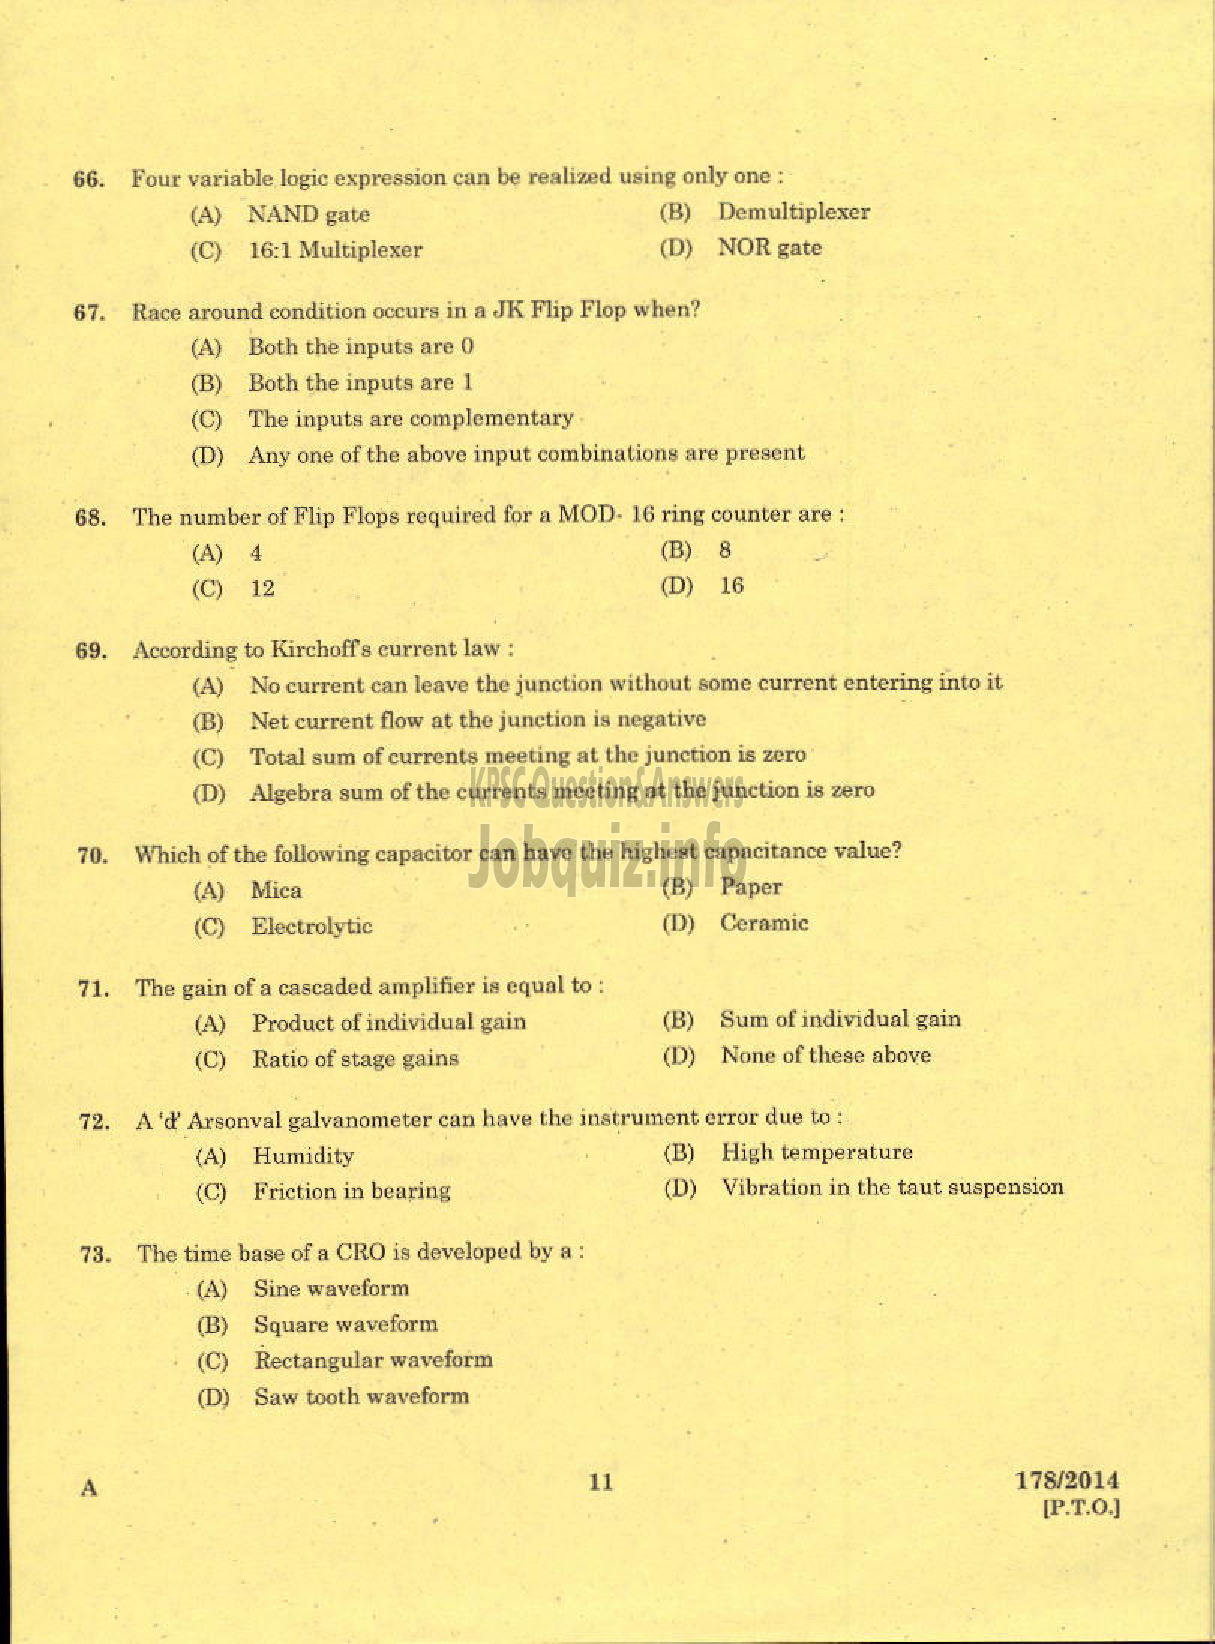 Kerala PSC Question Paper - TRADESMAN ELECTRONICS AND INSTRUMENTATION TECHNICAL EDUCATION KNR-9